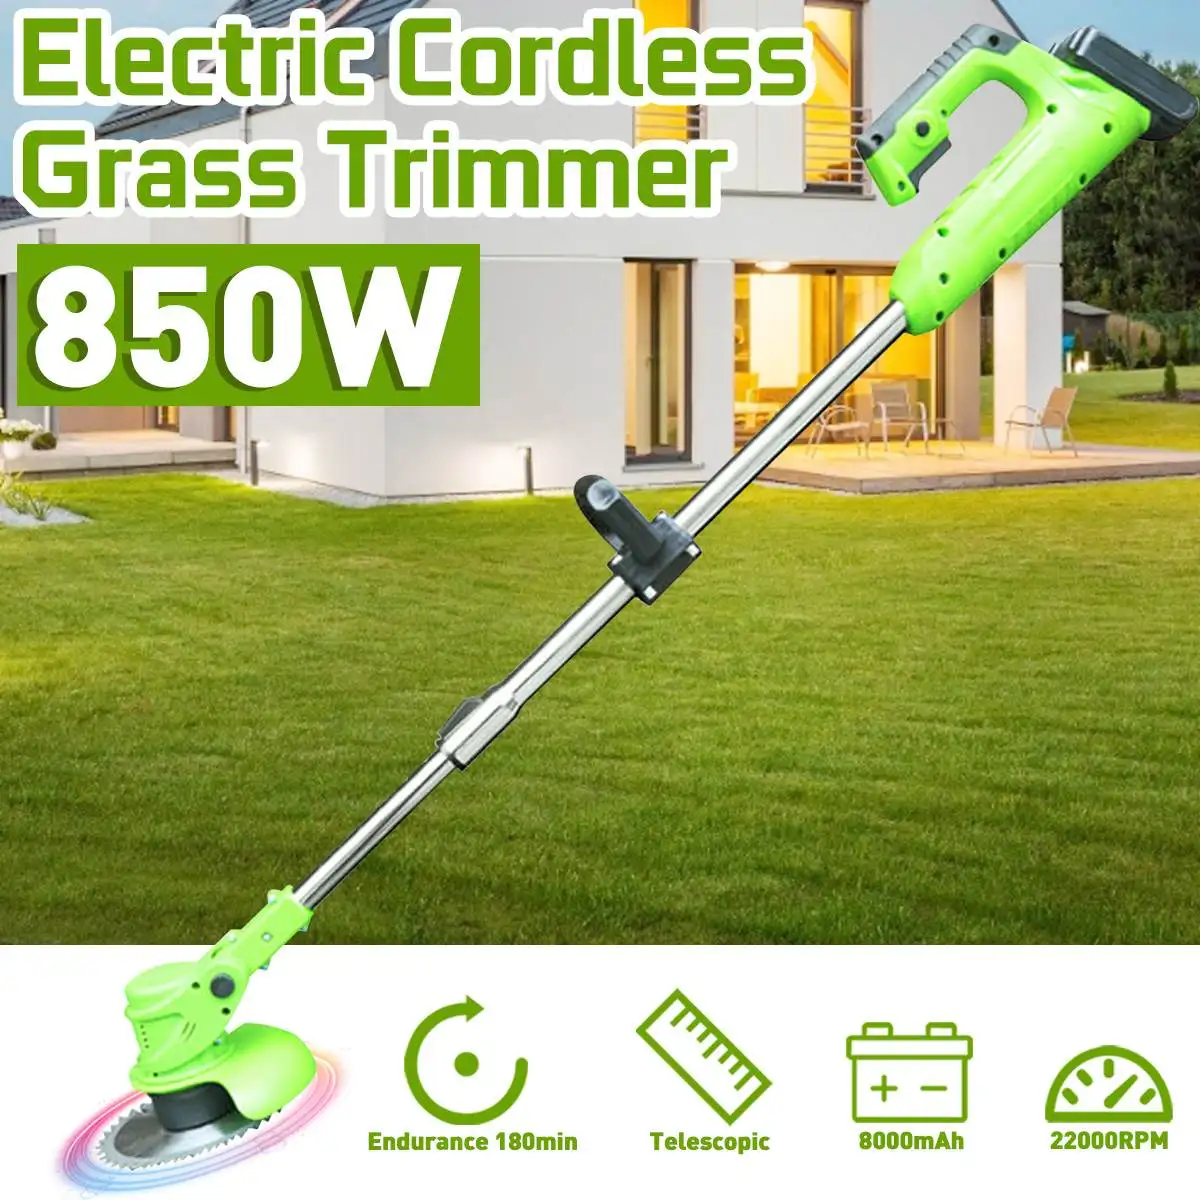 850W 12V/24V Electric Cordless Grass Trimmer Lawn Mower Weeds Cutter Machine Length Adjustable Garden Tools With 8000mAh Battery